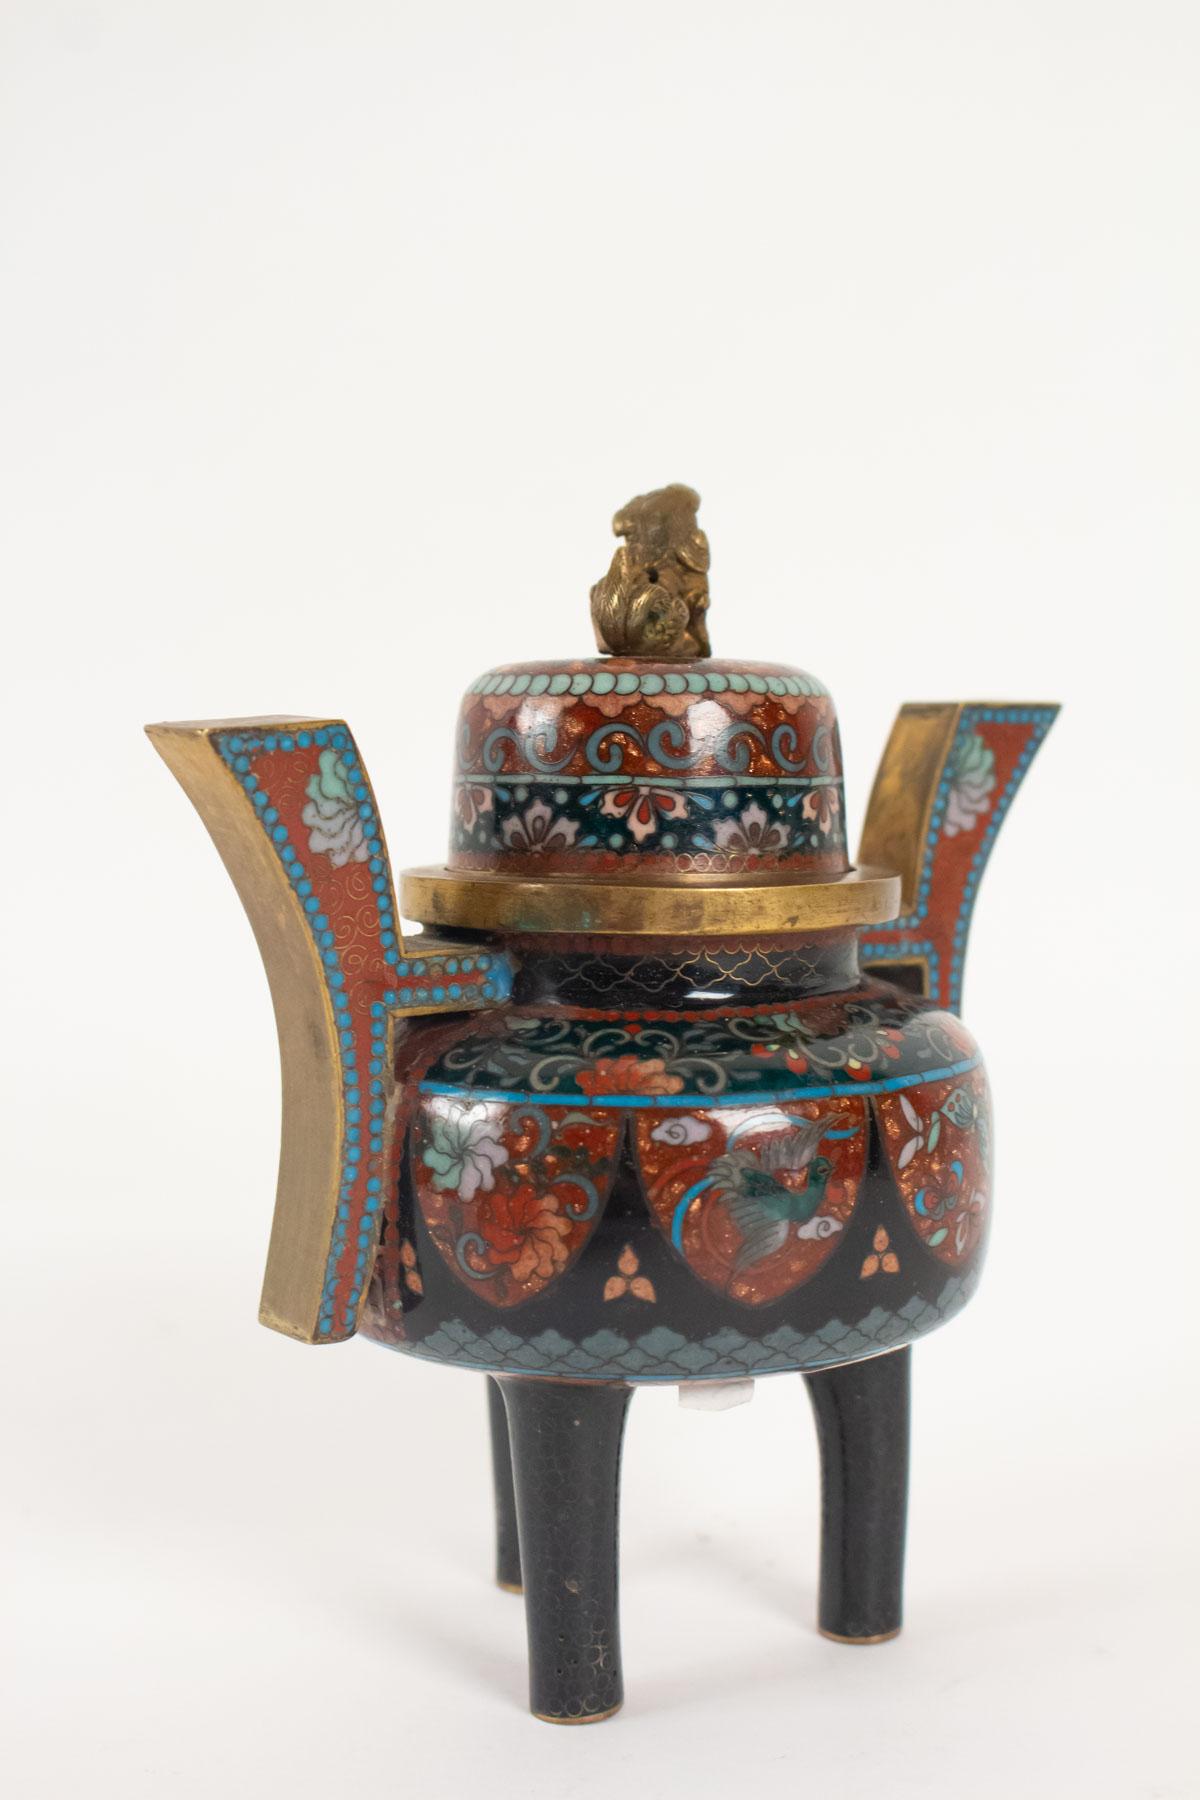 Asian Perfume Burner in Copper Decor Cloisonné Enamels, Topped of a Fo Dog, Japan